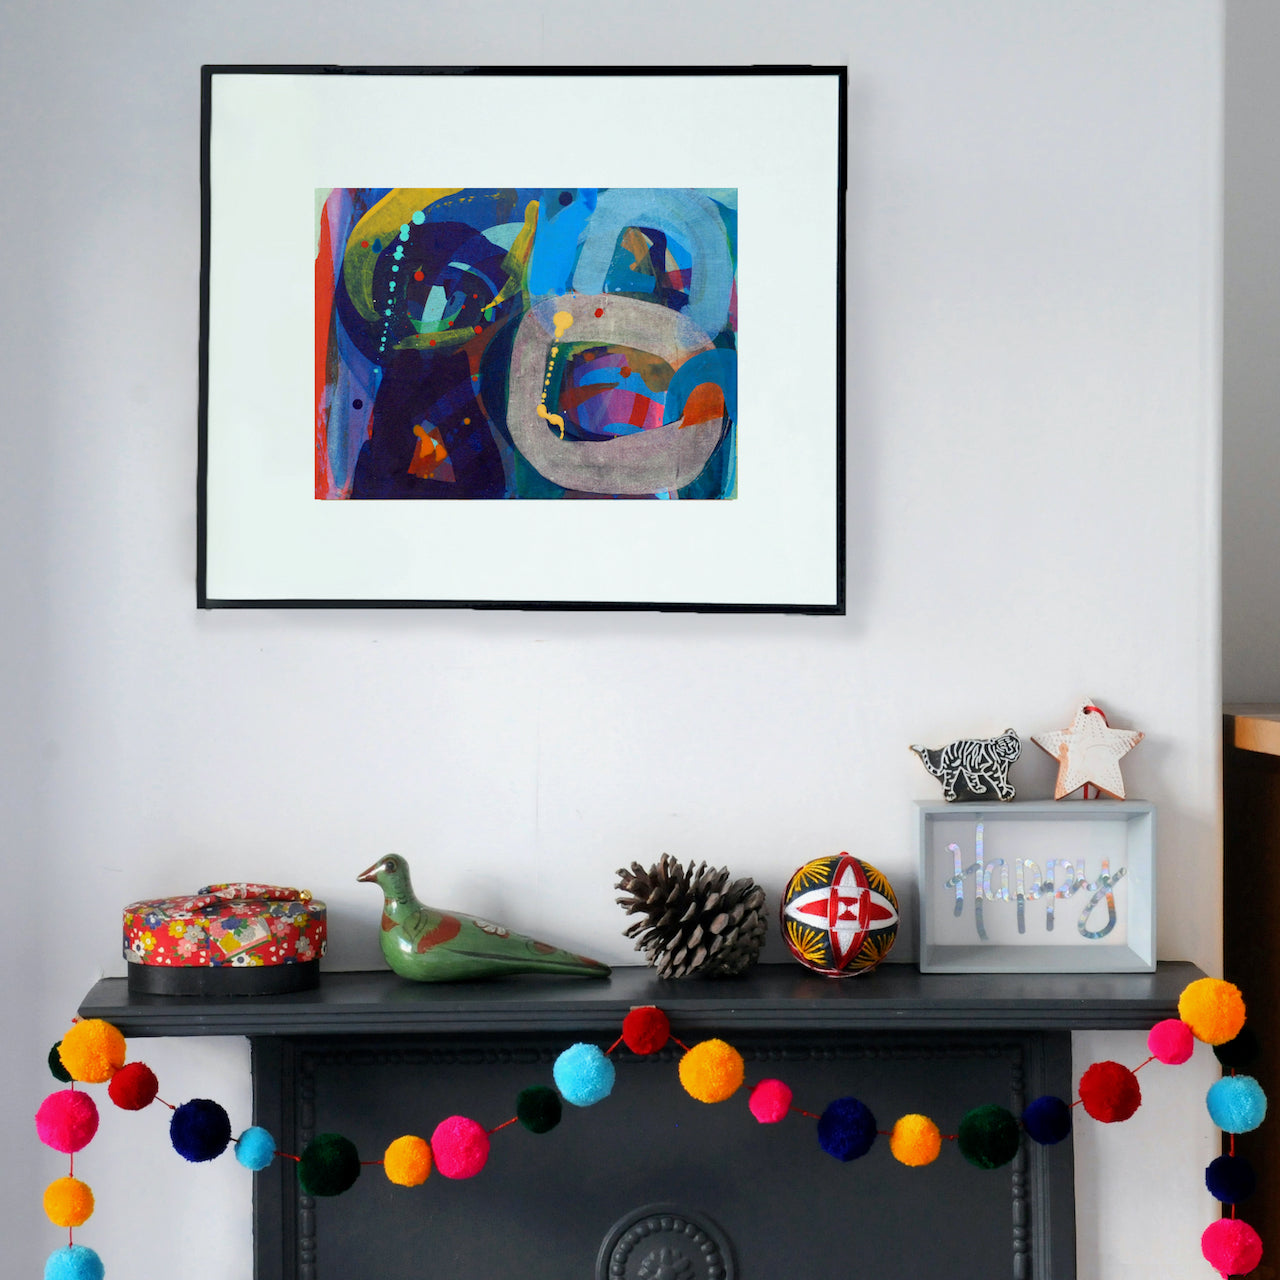 Artist Ella Carty, abstract piece in tones of blue, grey with a sprinkle of yellow, red and pink